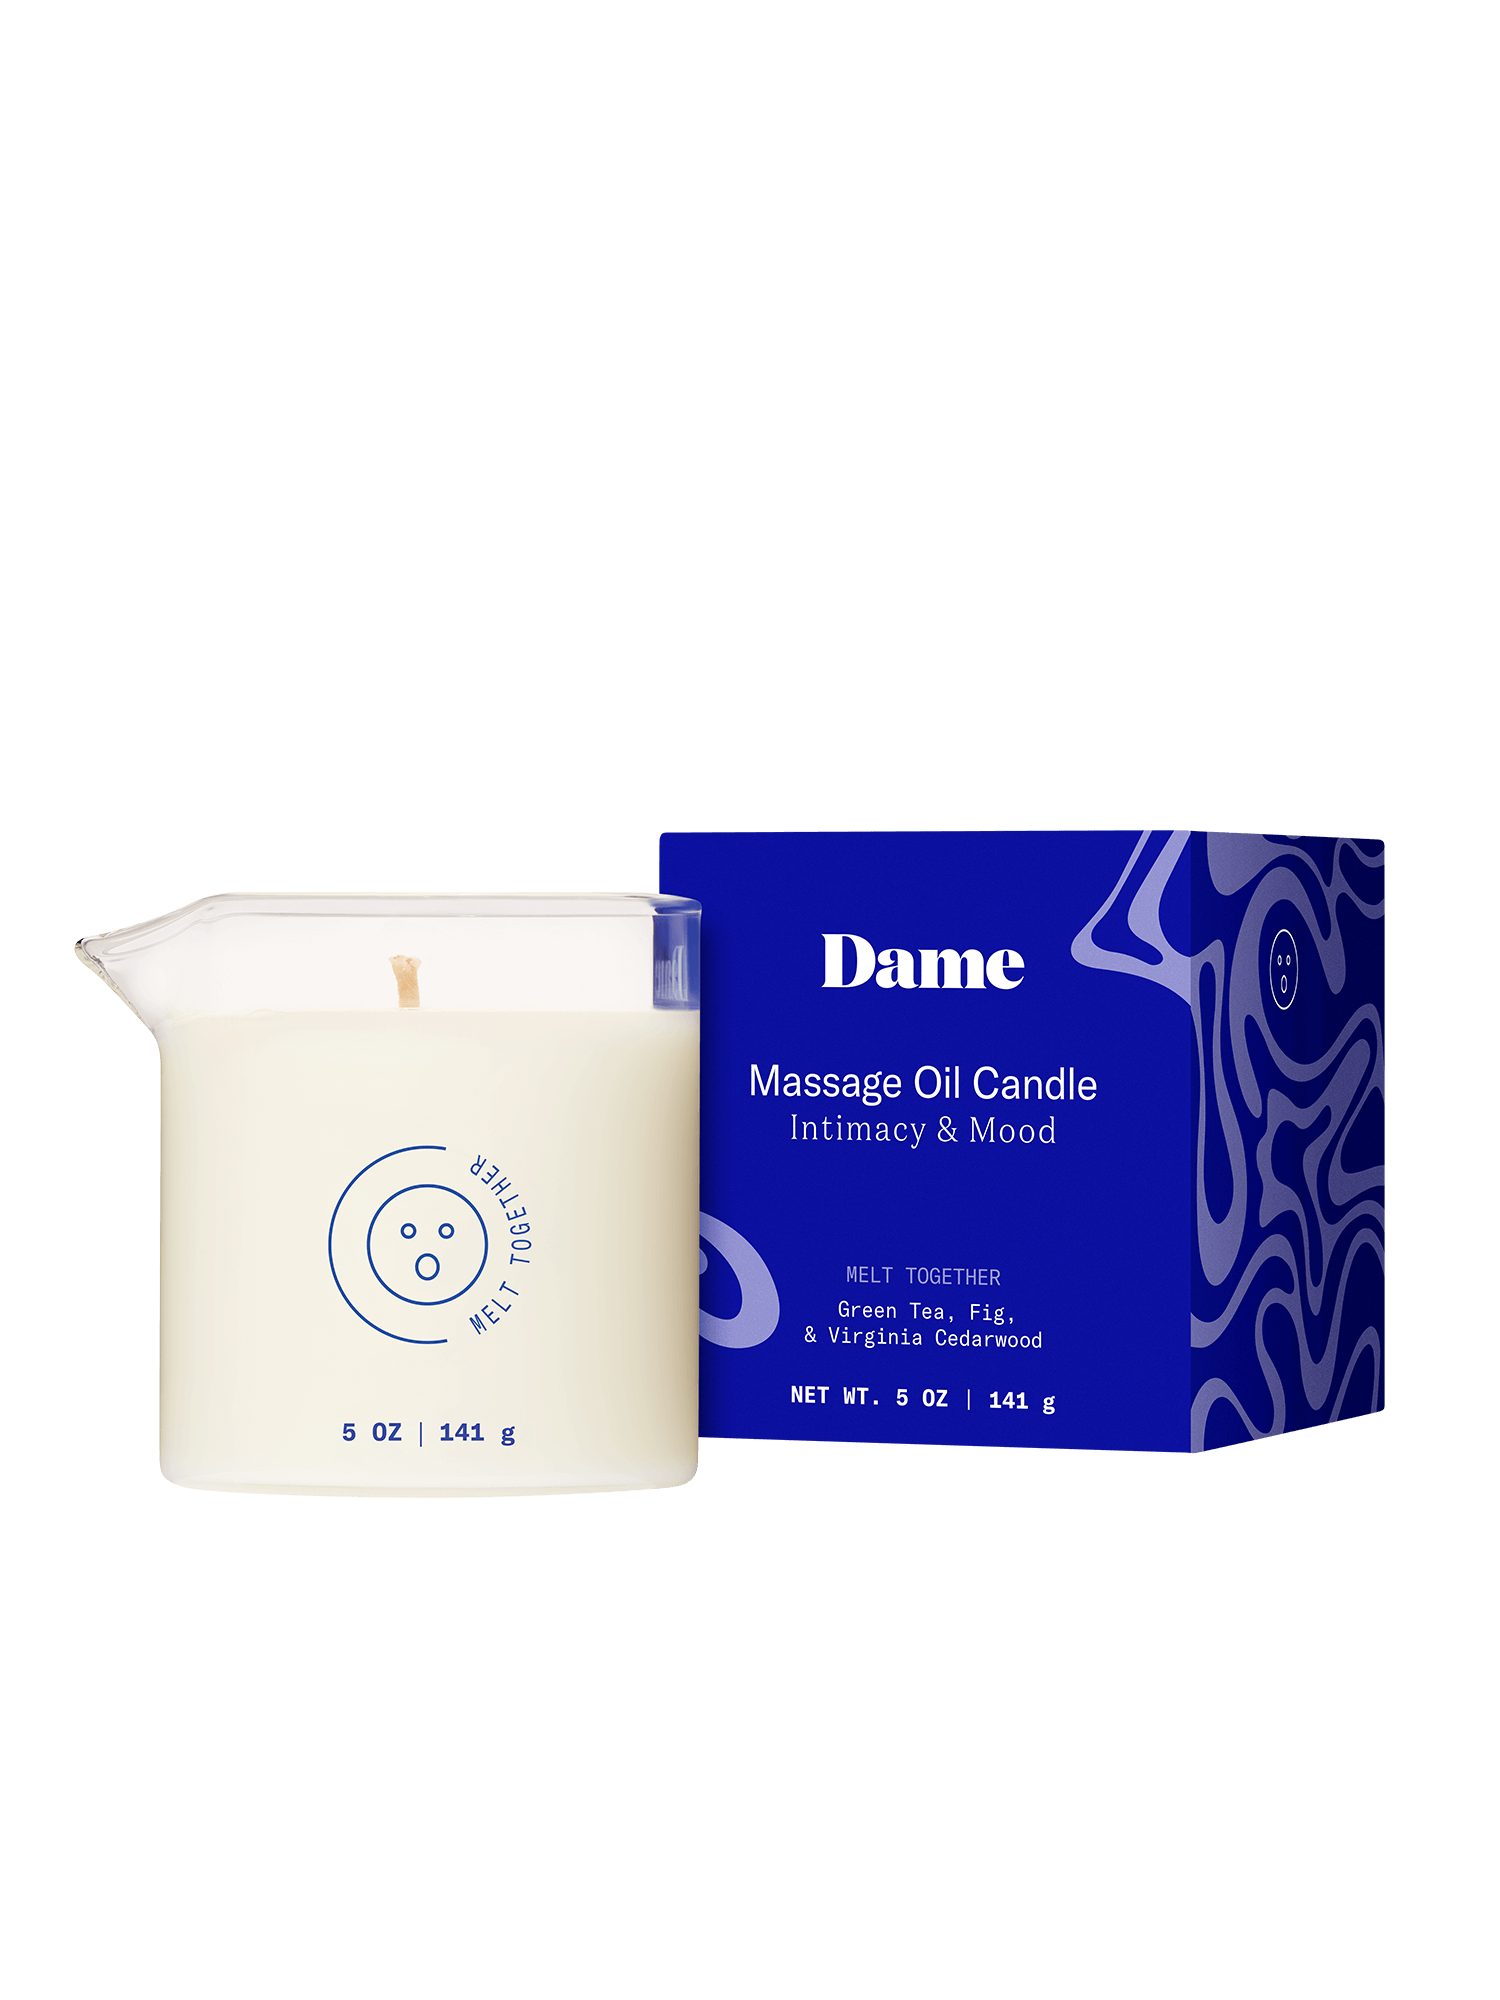 Melt Together | Dame Massage Oil Candle out of the box next to its blue packaging box